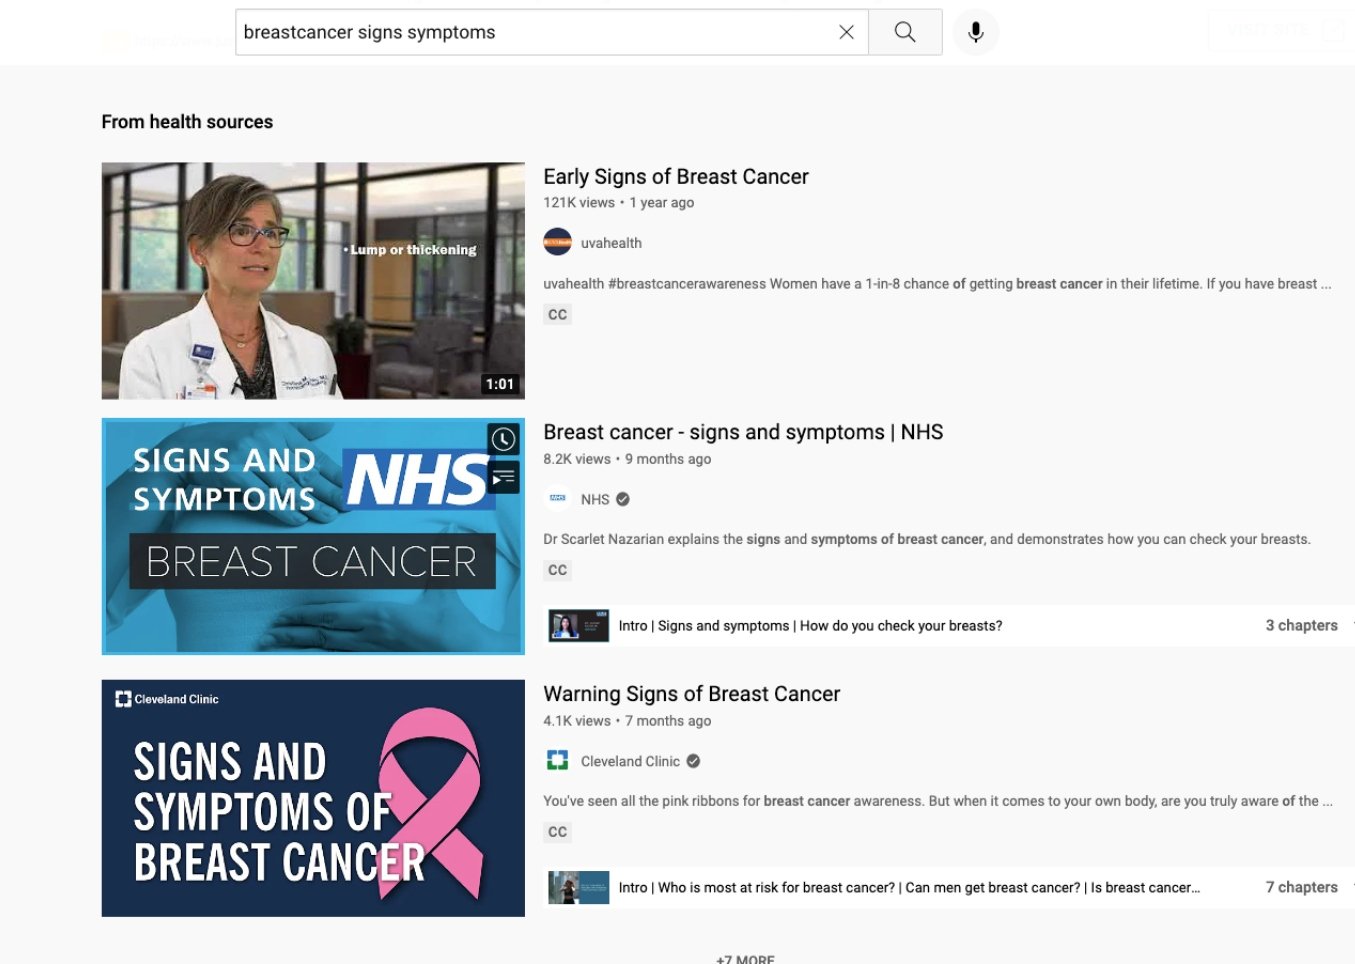 YouTube search for breast cancer symptoms with 3 videos from health sources including an NHS video on breast cancer symptoms